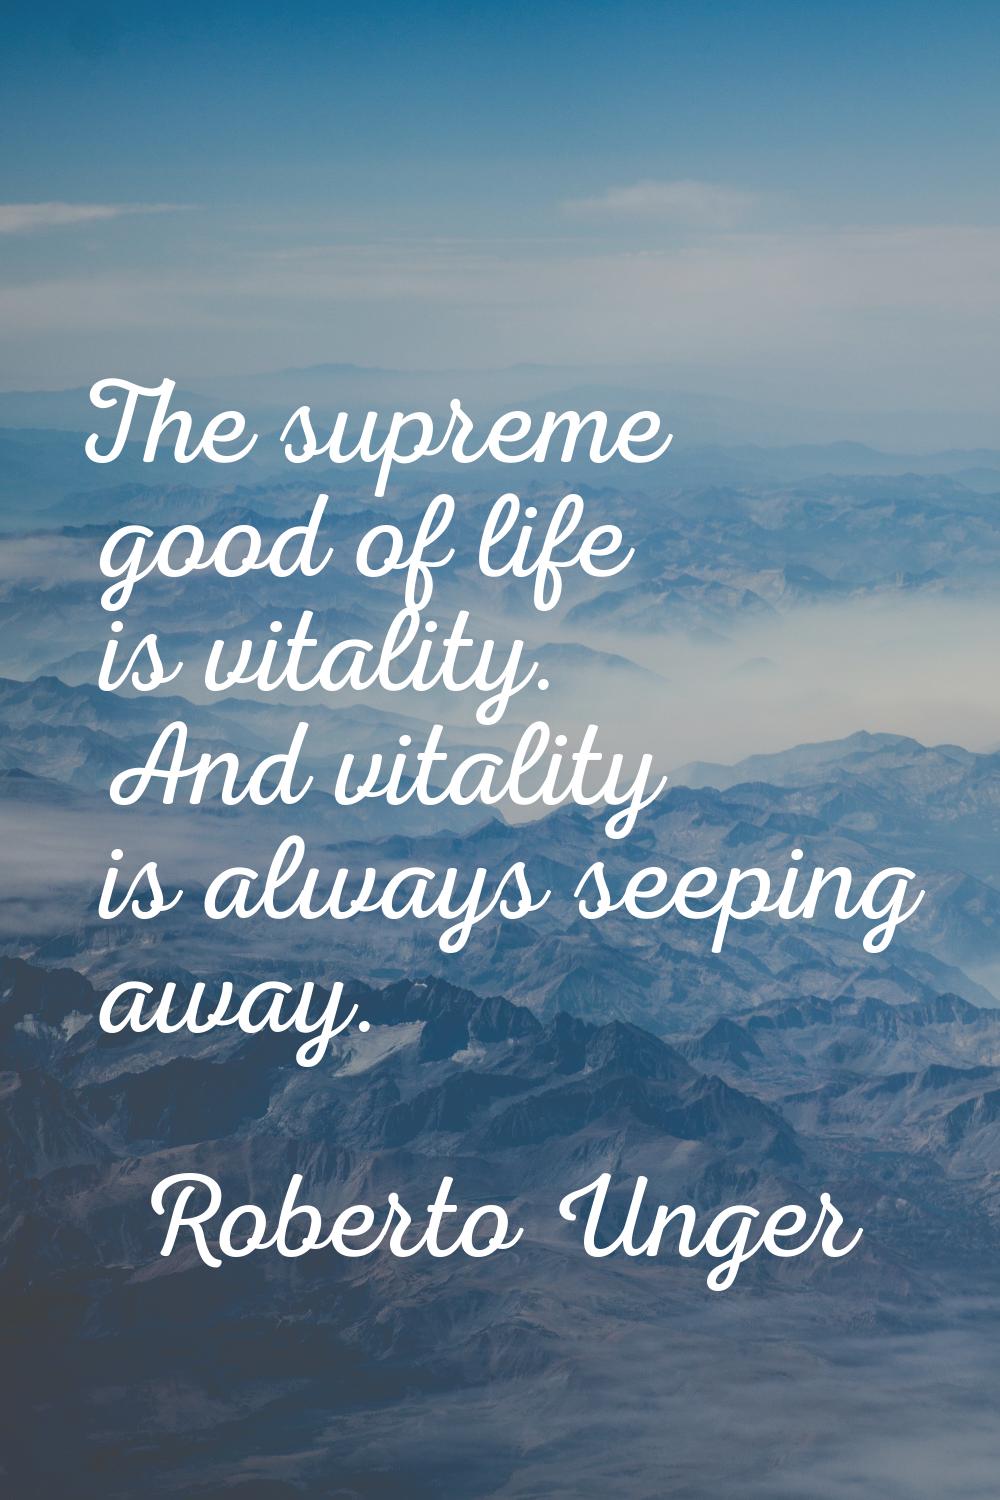 The supreme good of life is vitality. And vitality is always seeping away.